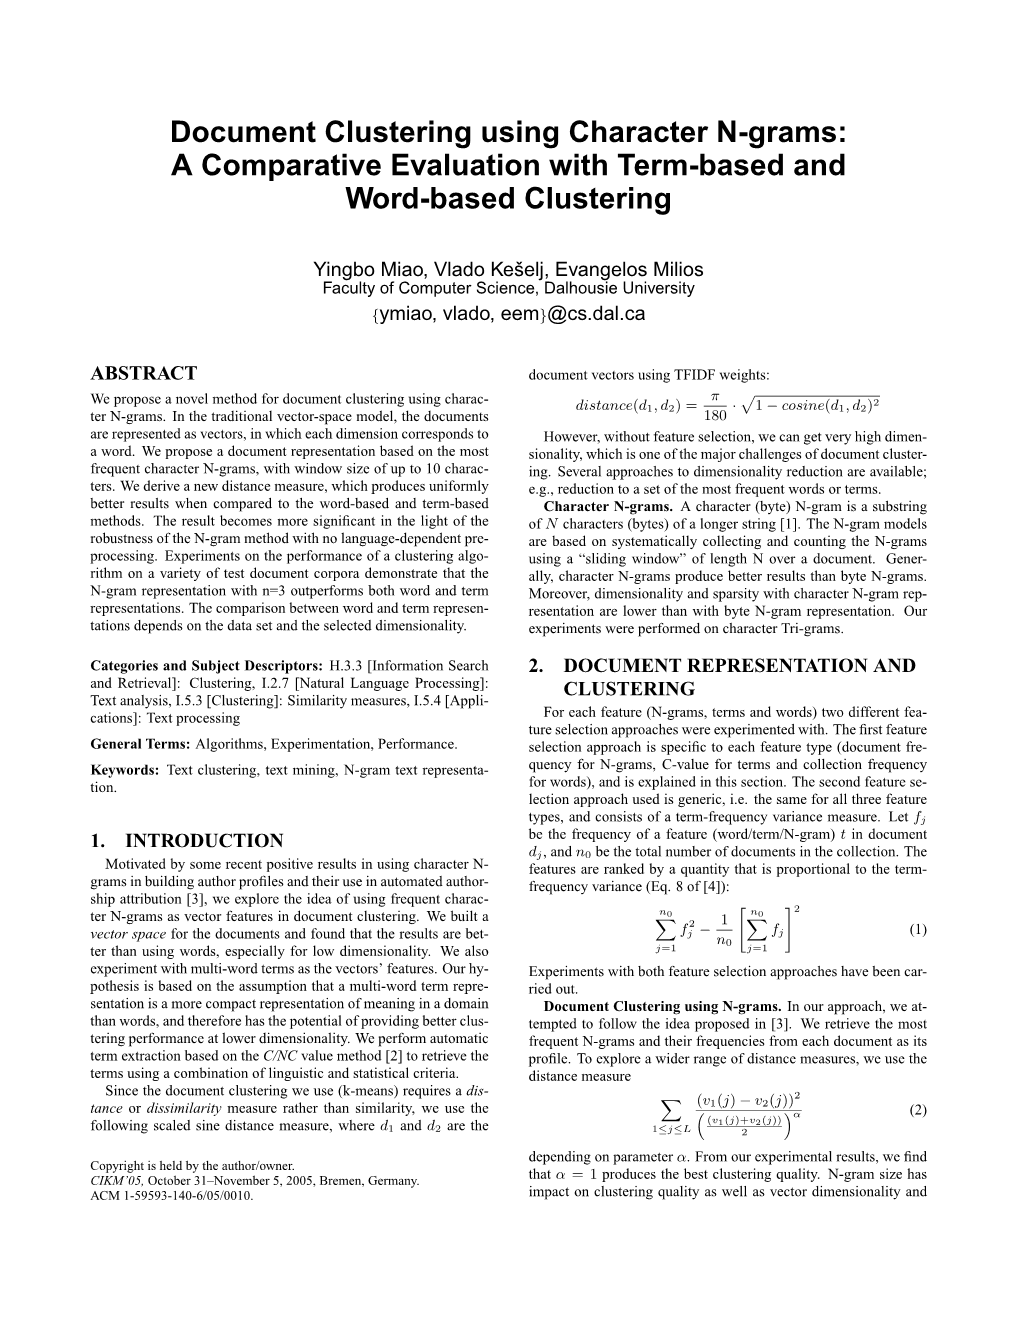 Document Clustering Using Character N-Grams: a Comparative Evaluation with Term-Based and Word-Based Clustering